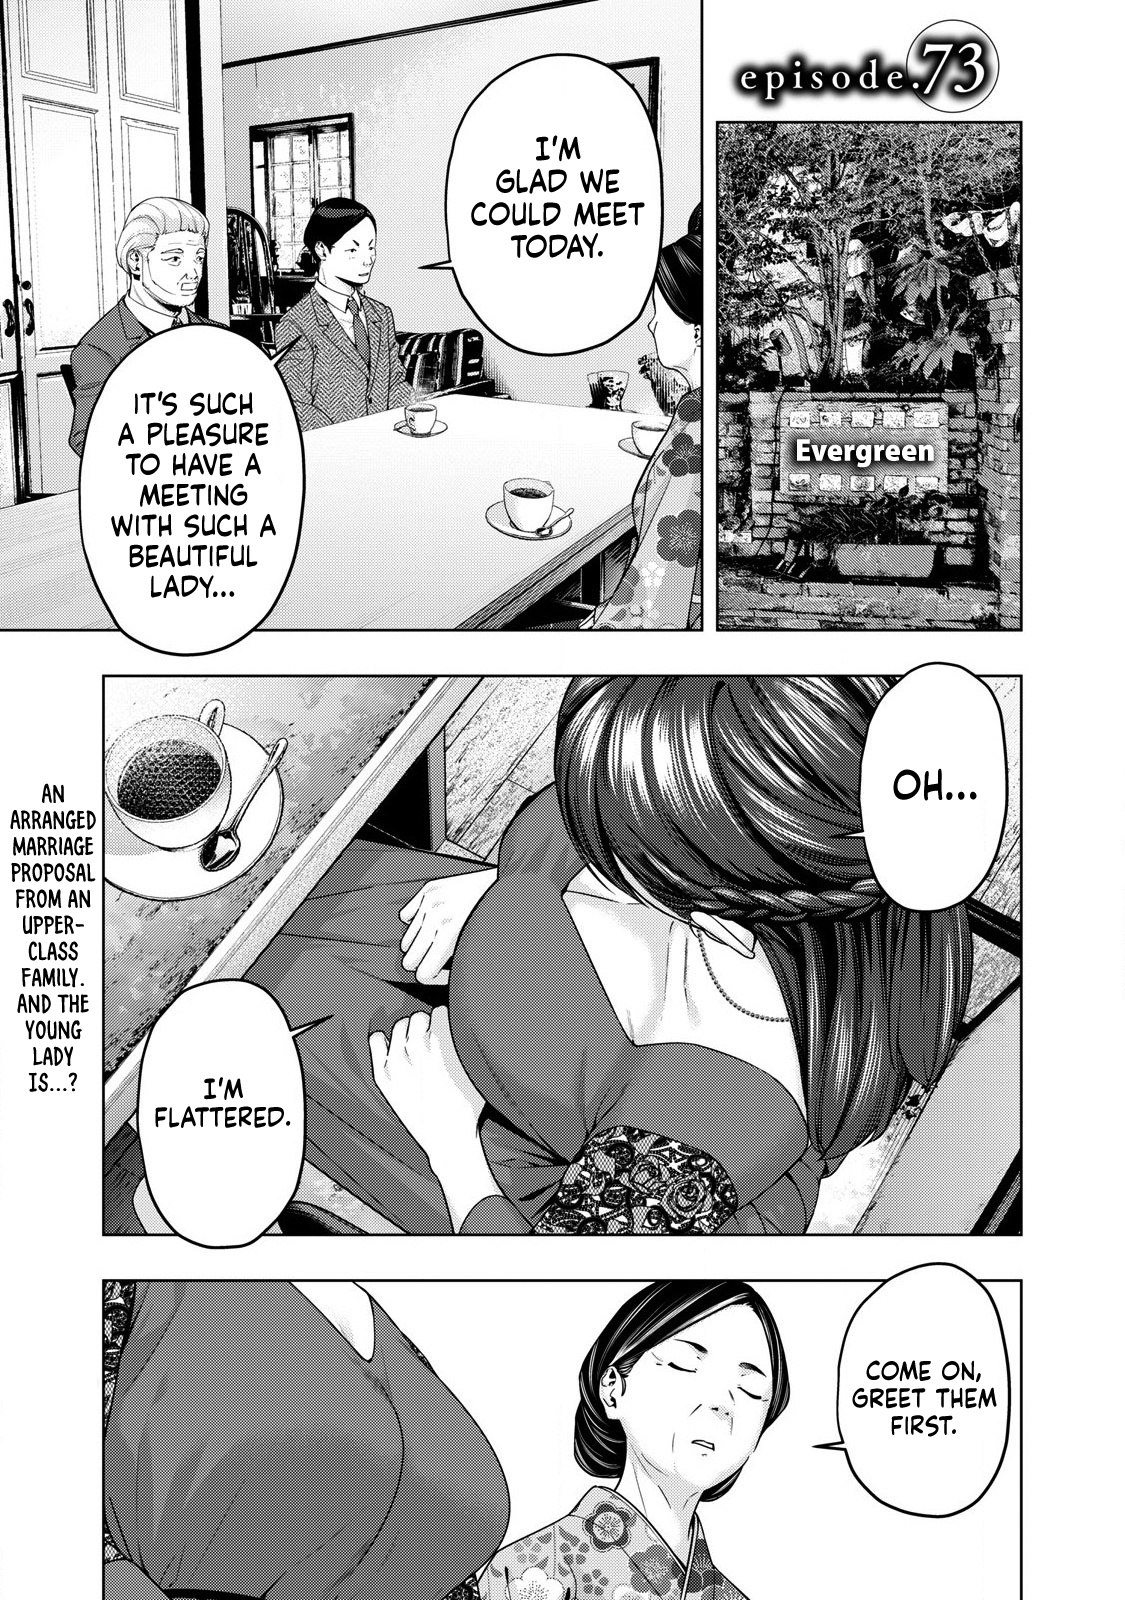 My Girlfriend's Friend Vol.5 Chapter 73 - Picture 2